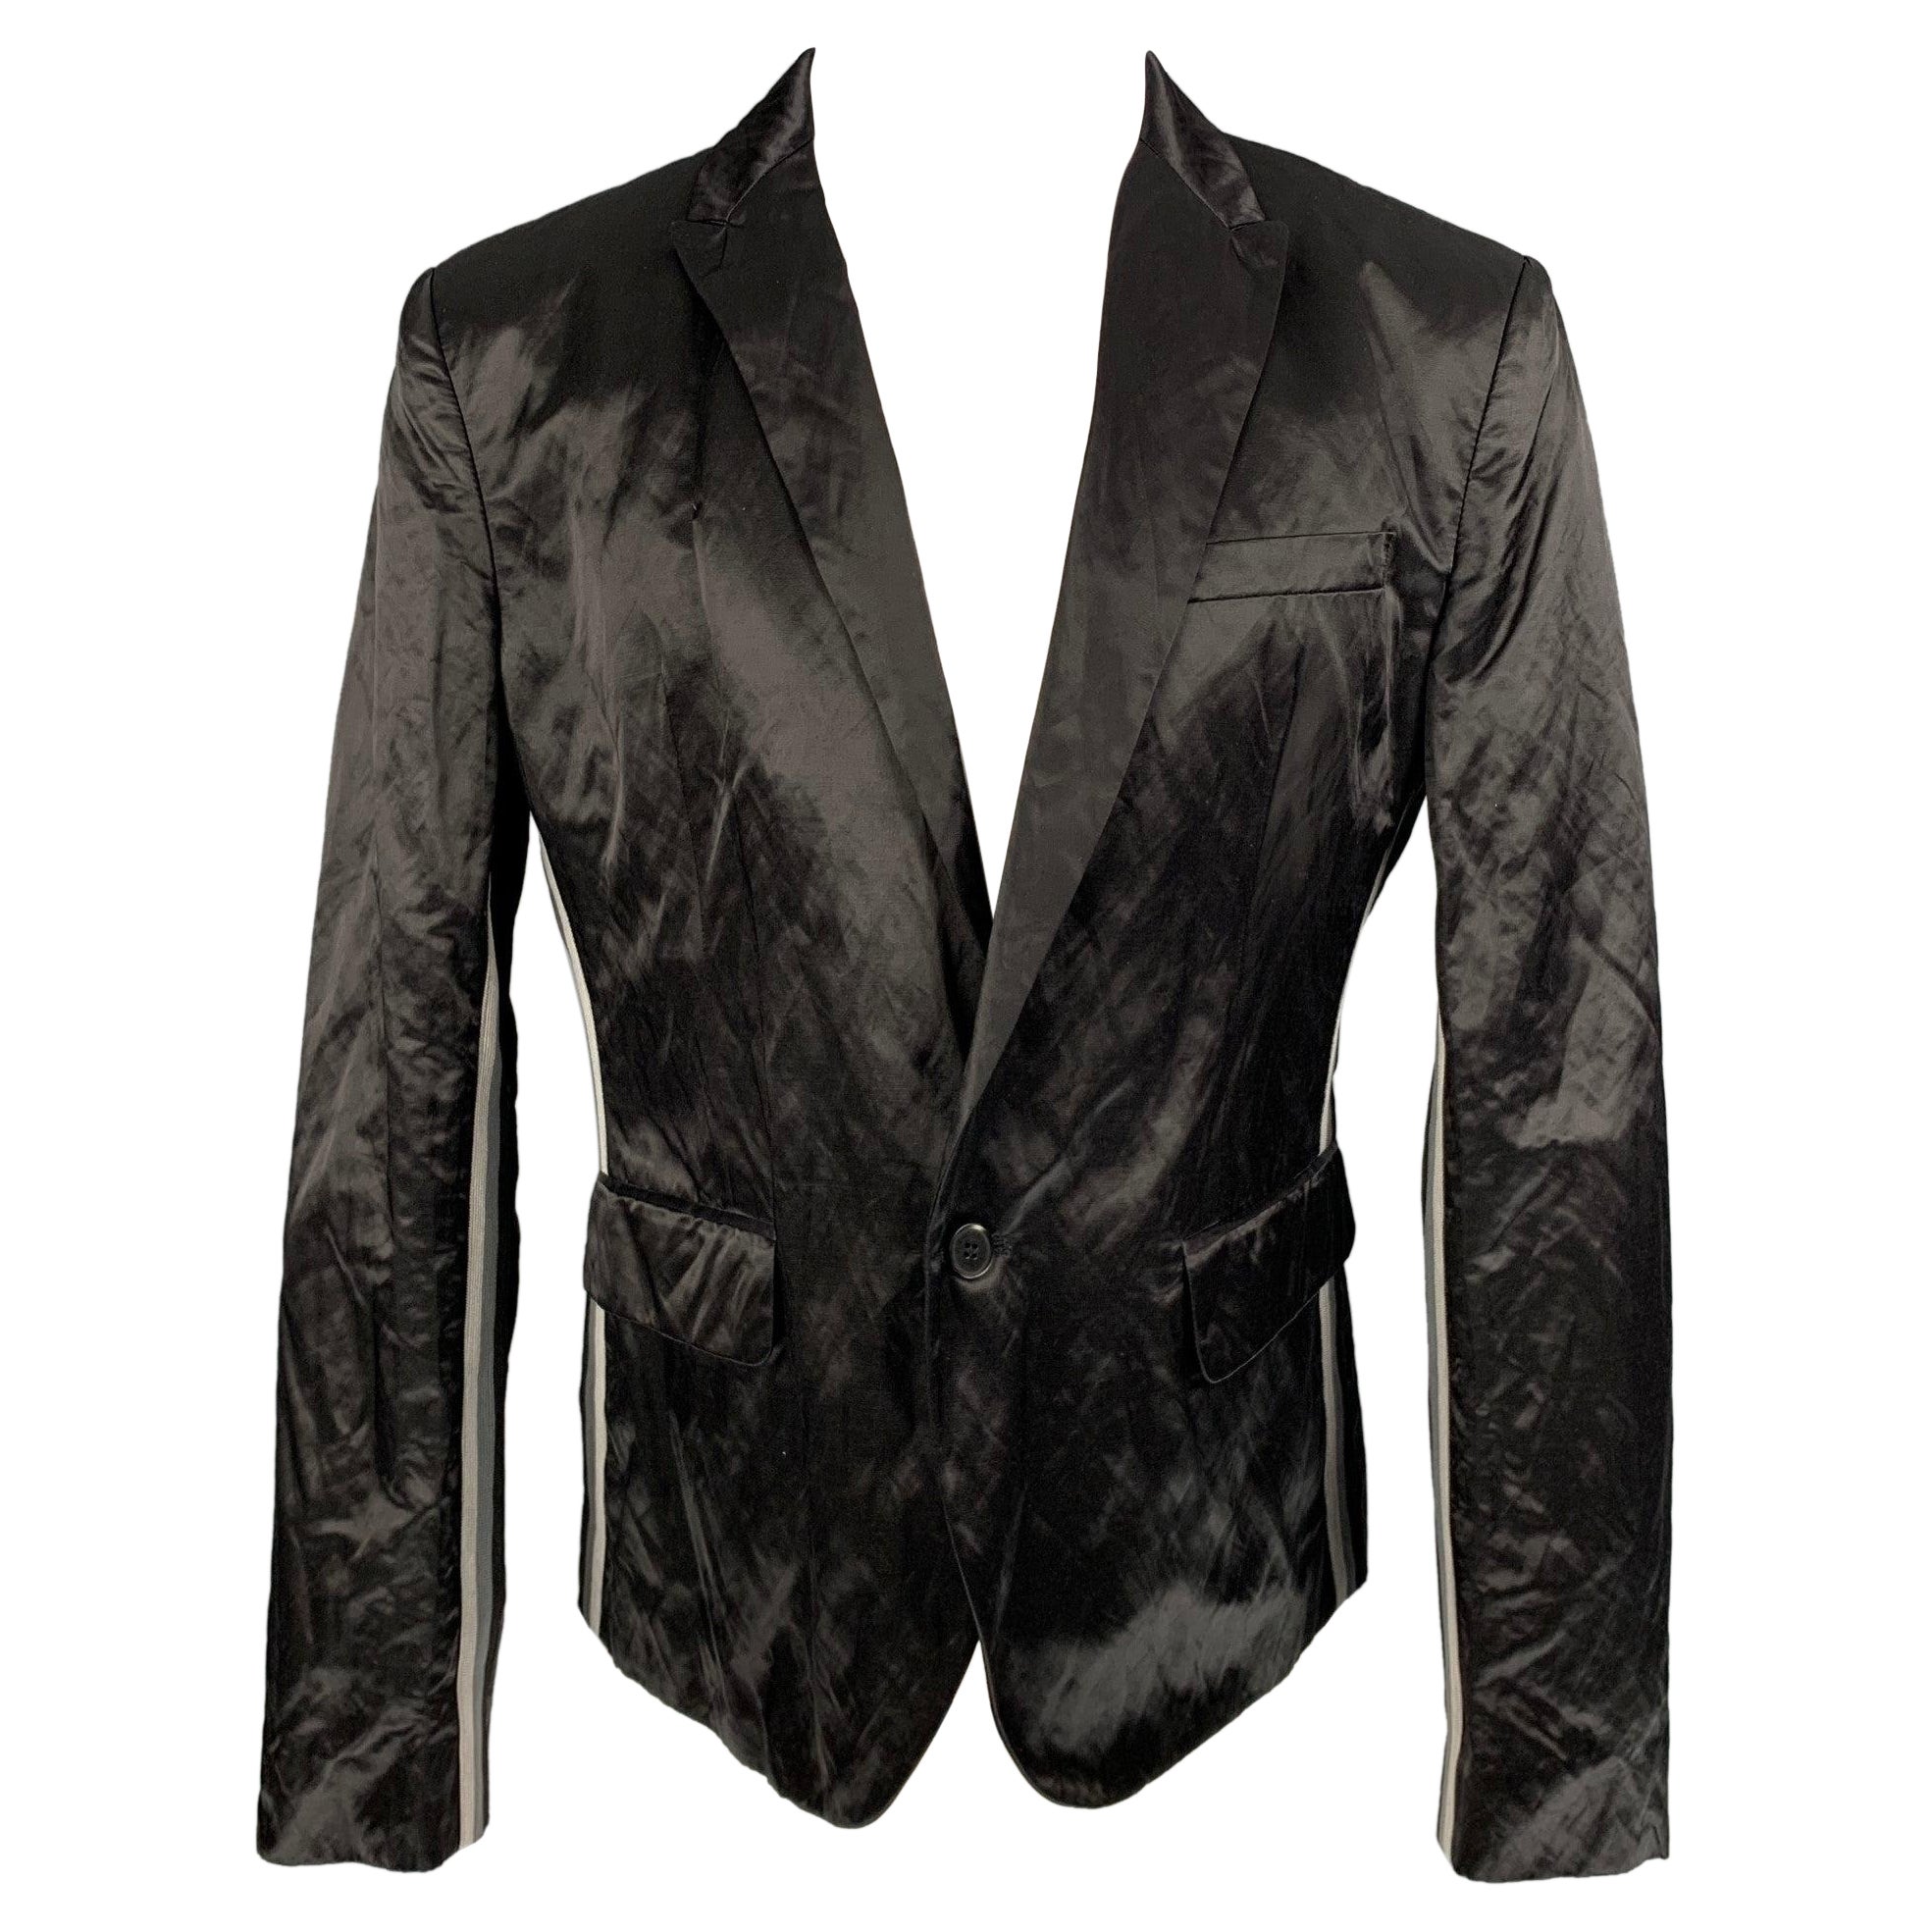 LOVE MOSCHINO Black Wrinkled Cotton Blend Notch Lapel Sport Coat For Sale